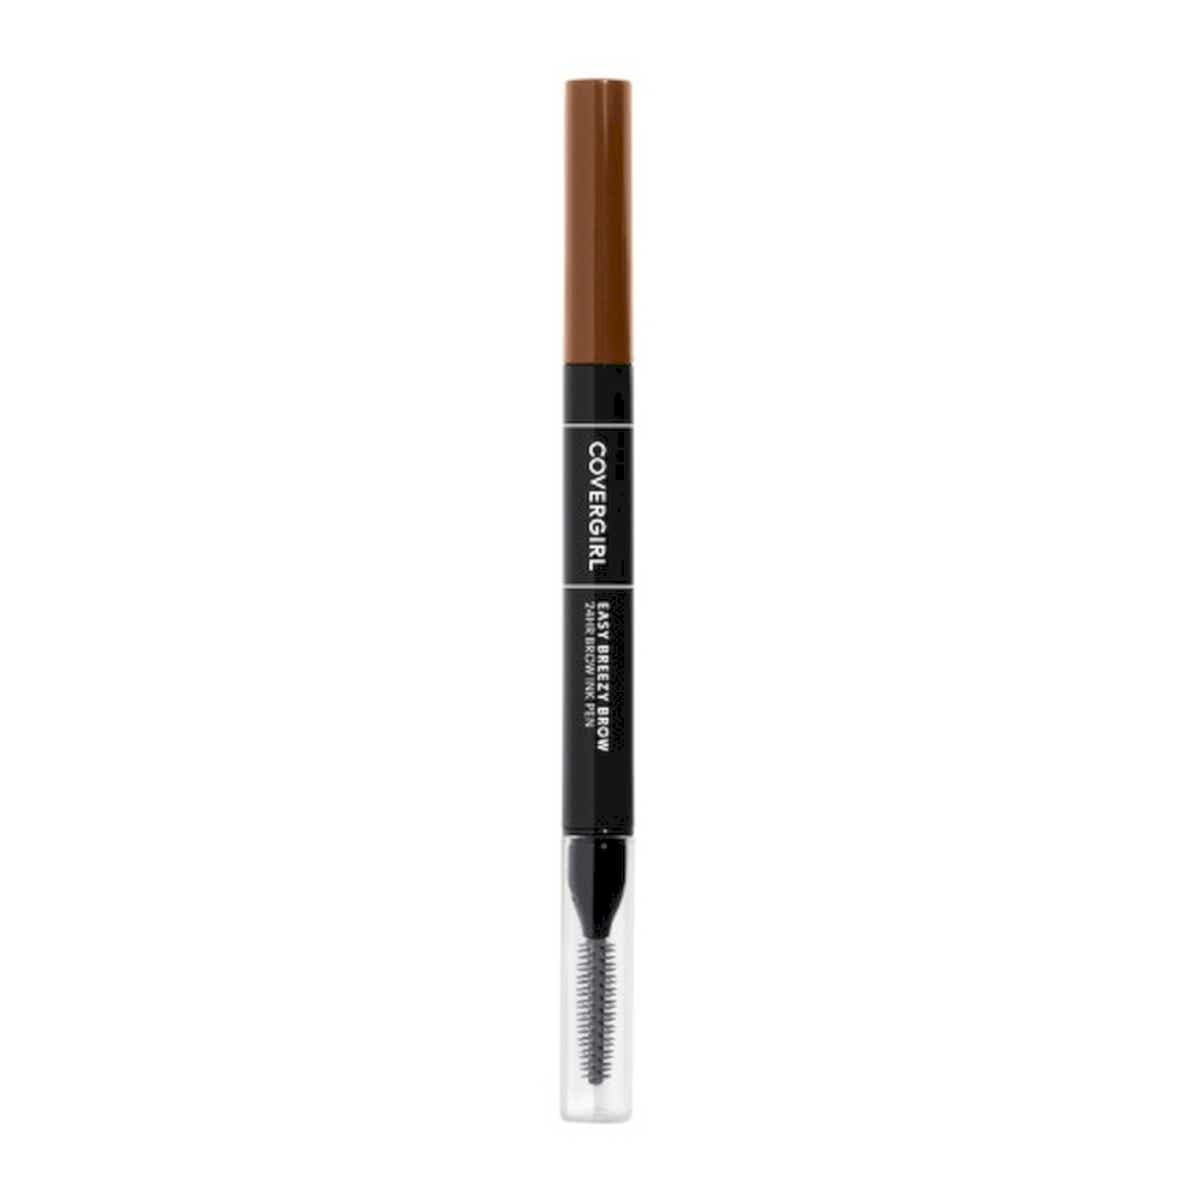 Easy Breezy Brow All-Day Brow Ink Pen